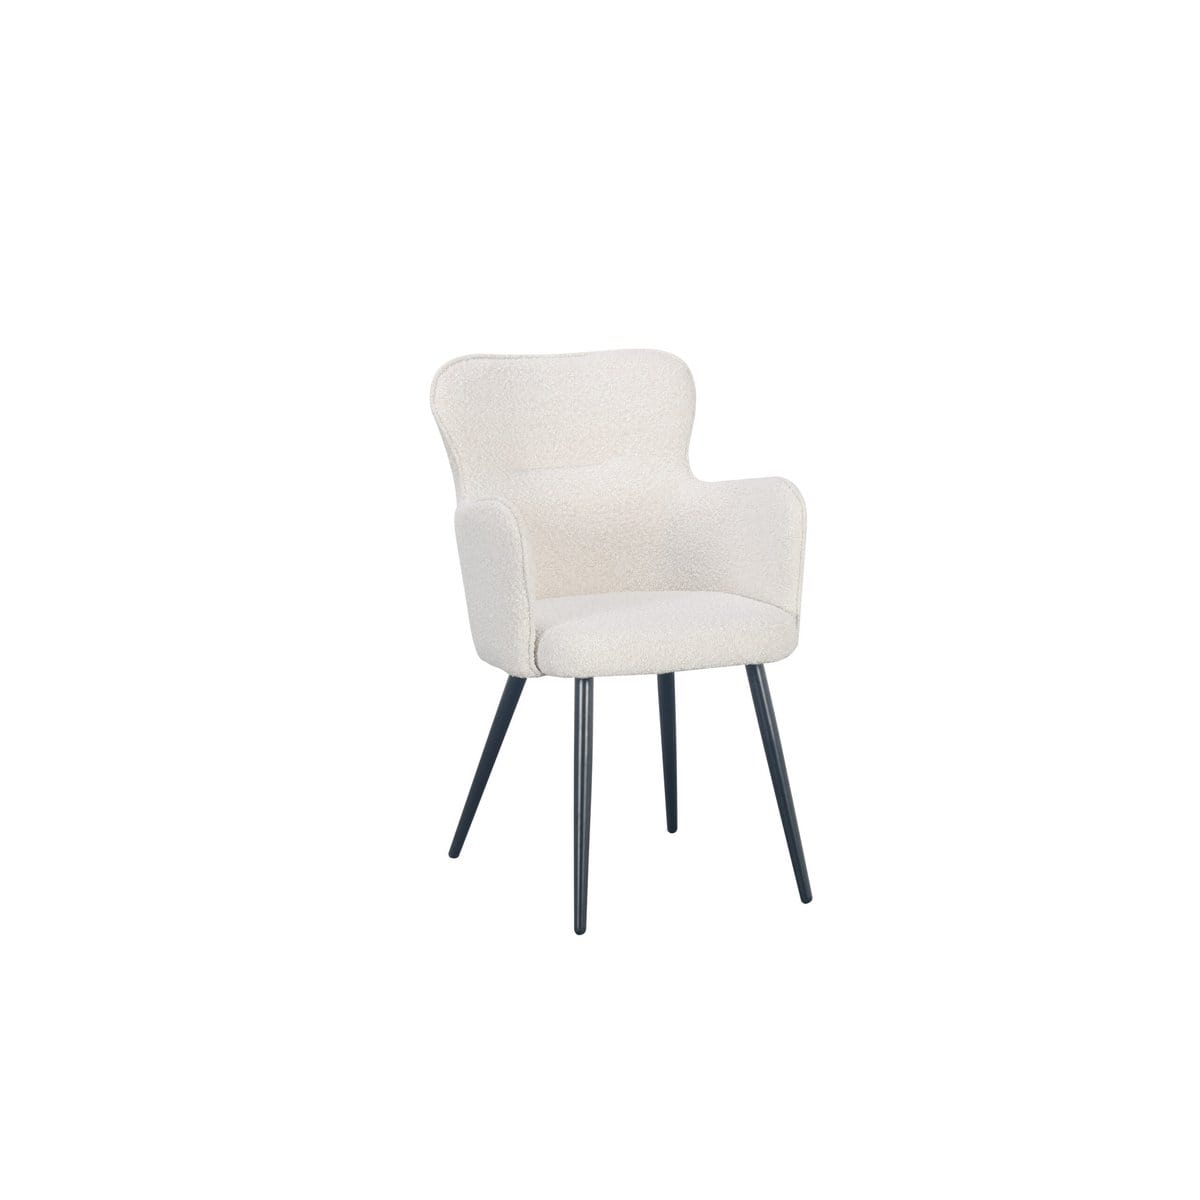 Pole To Pole Wing chair pearl white (Set of 2)